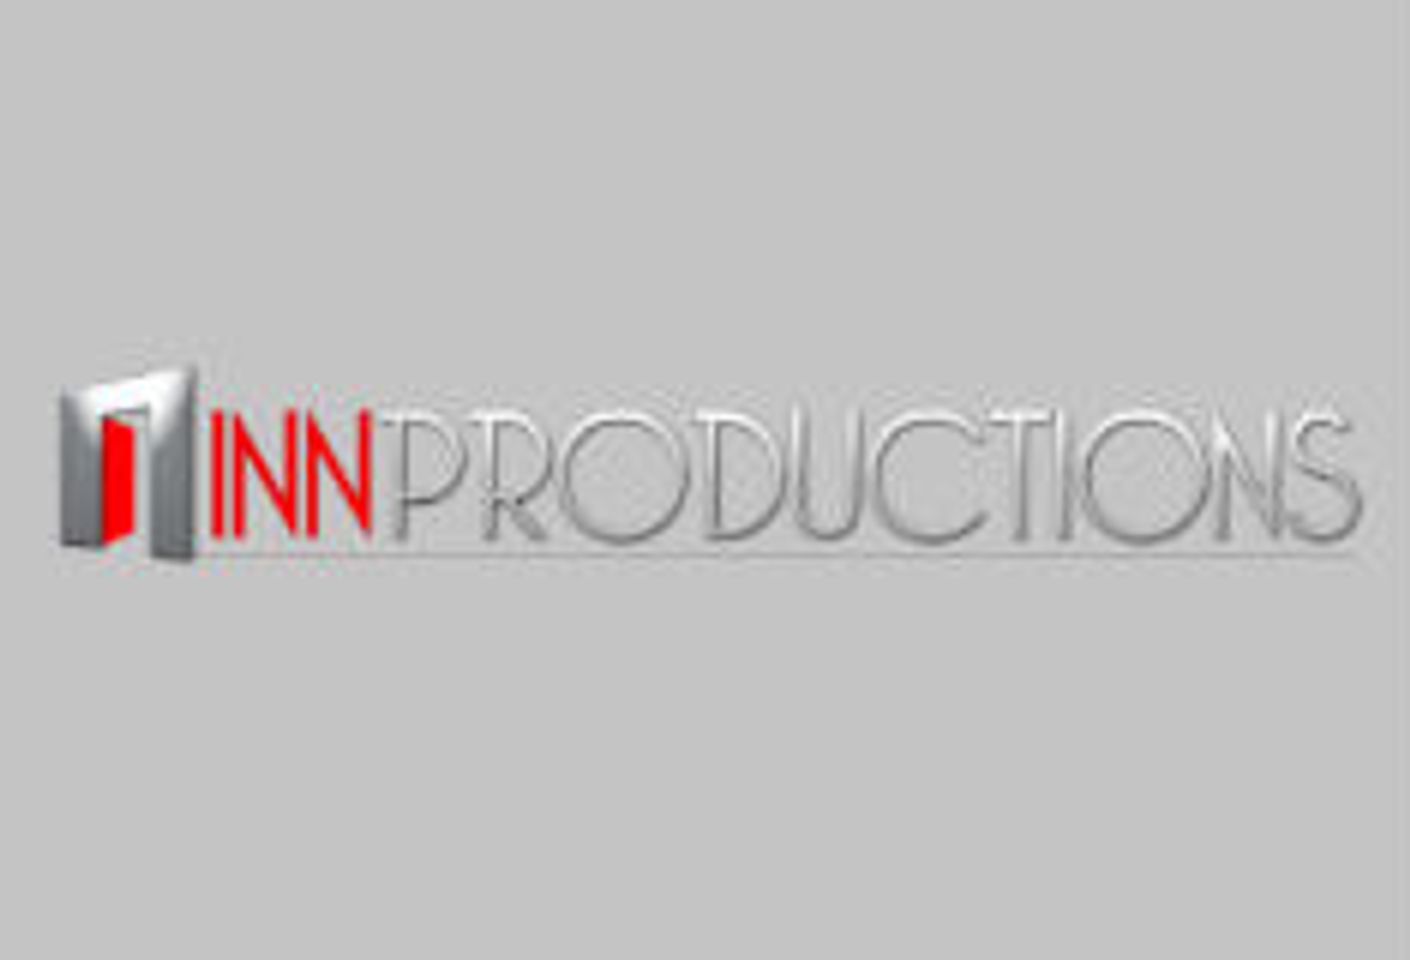 Inn Productions Seeking Industry Professionals to Join Team